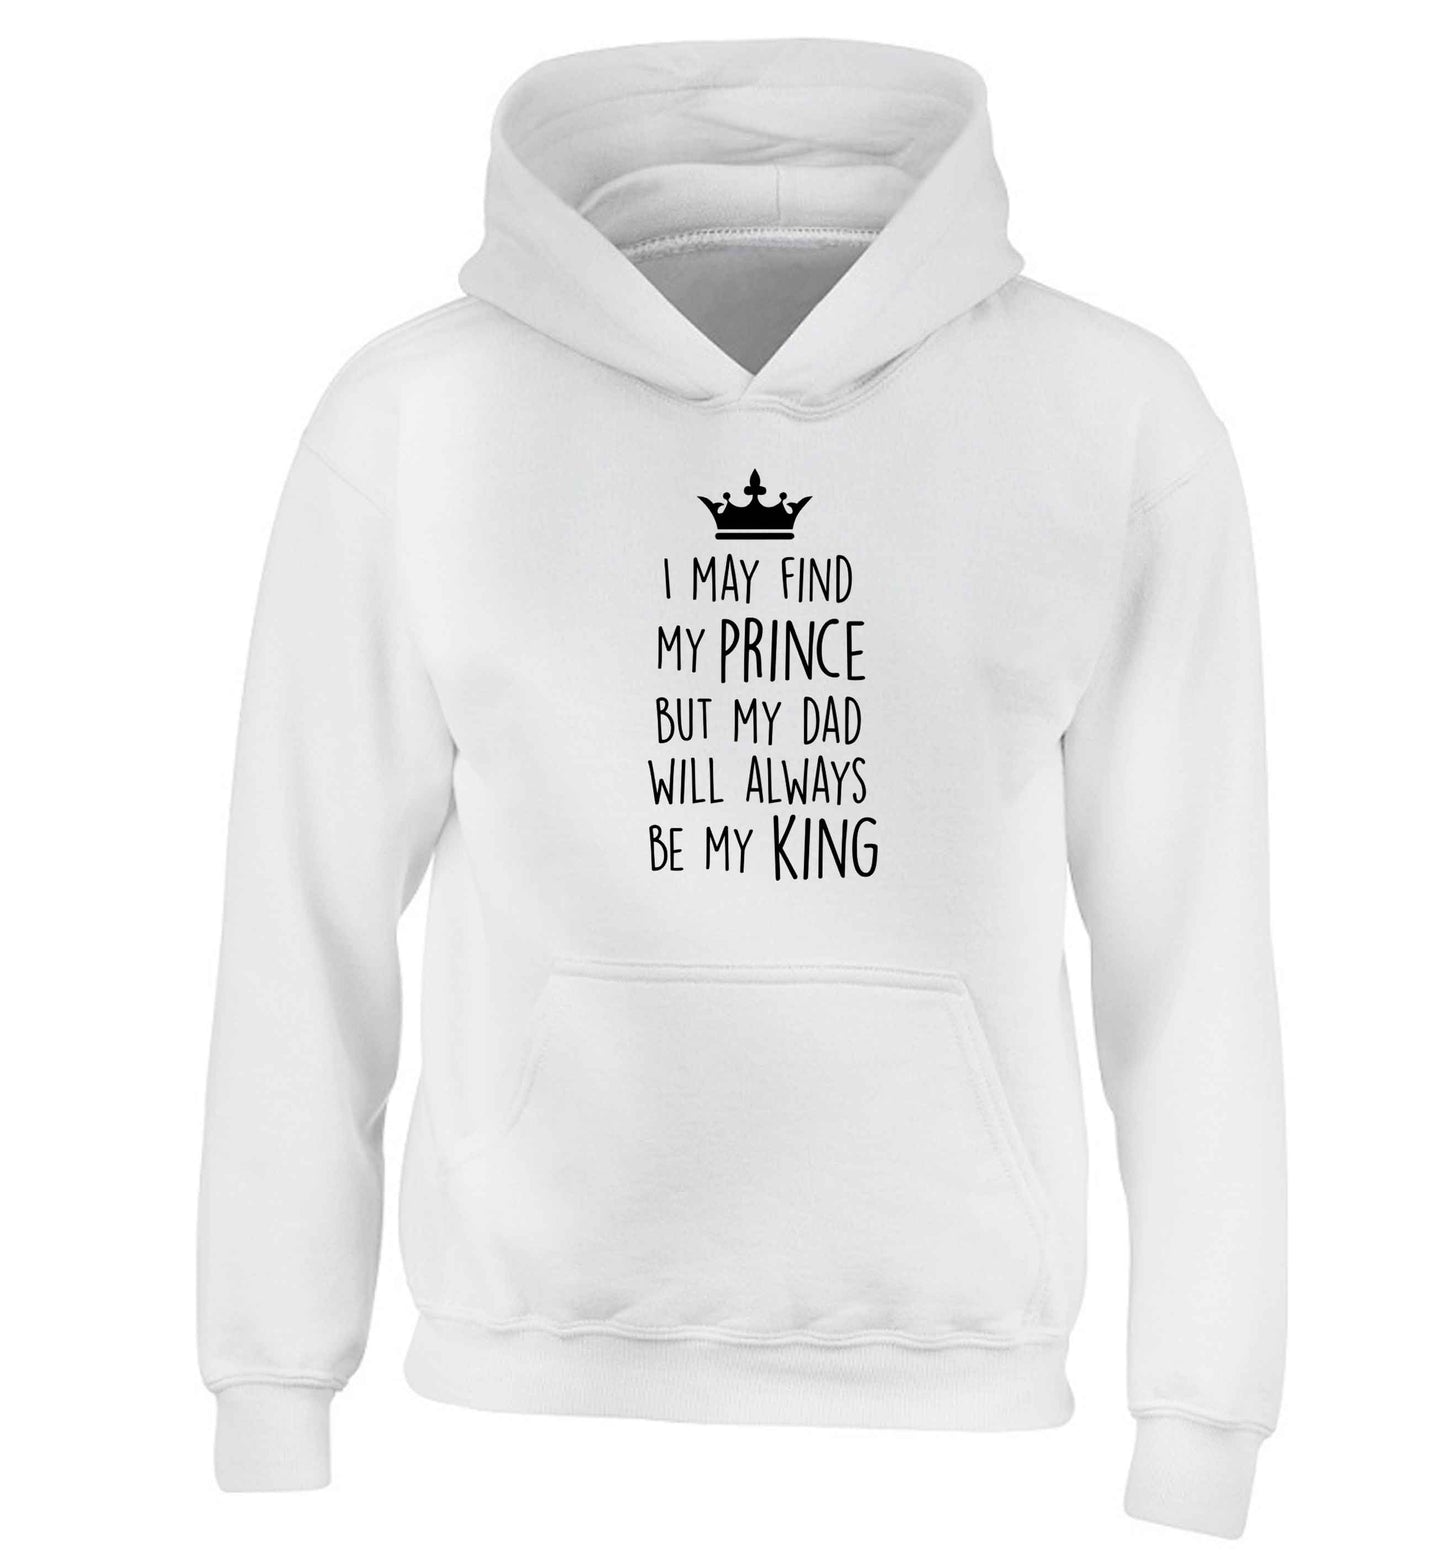 I may find my prince but my dad will always be my king children's white hoodie 12-13 Years